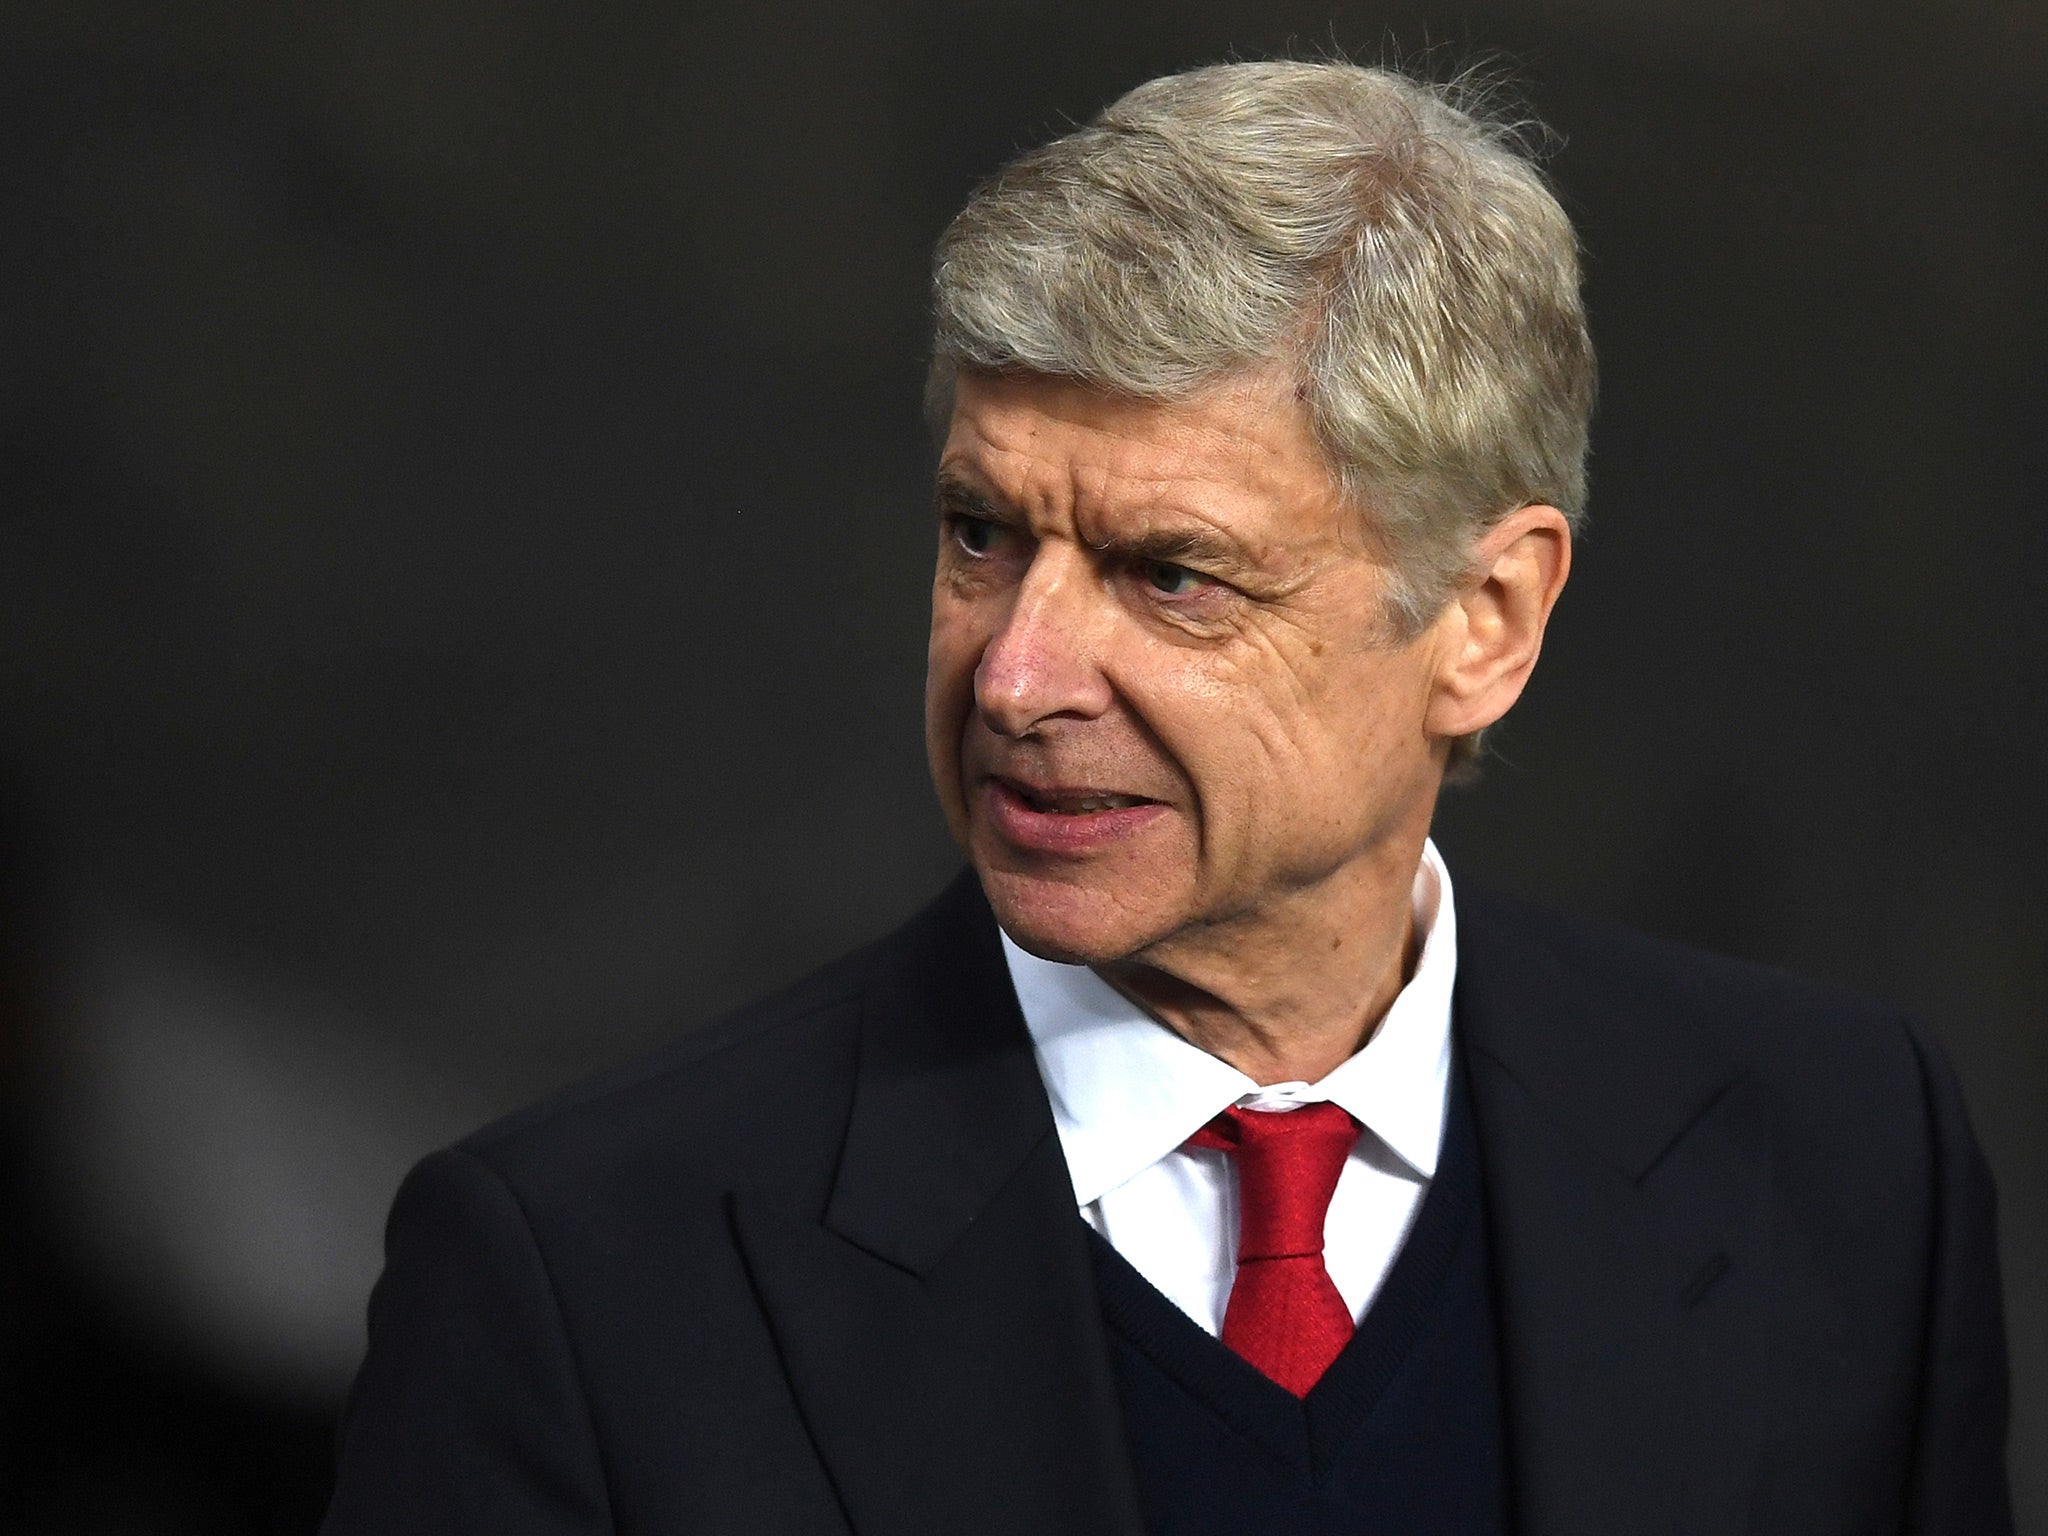 Wenger has secured the future of his Arsenal spine, now he must tie down his stars